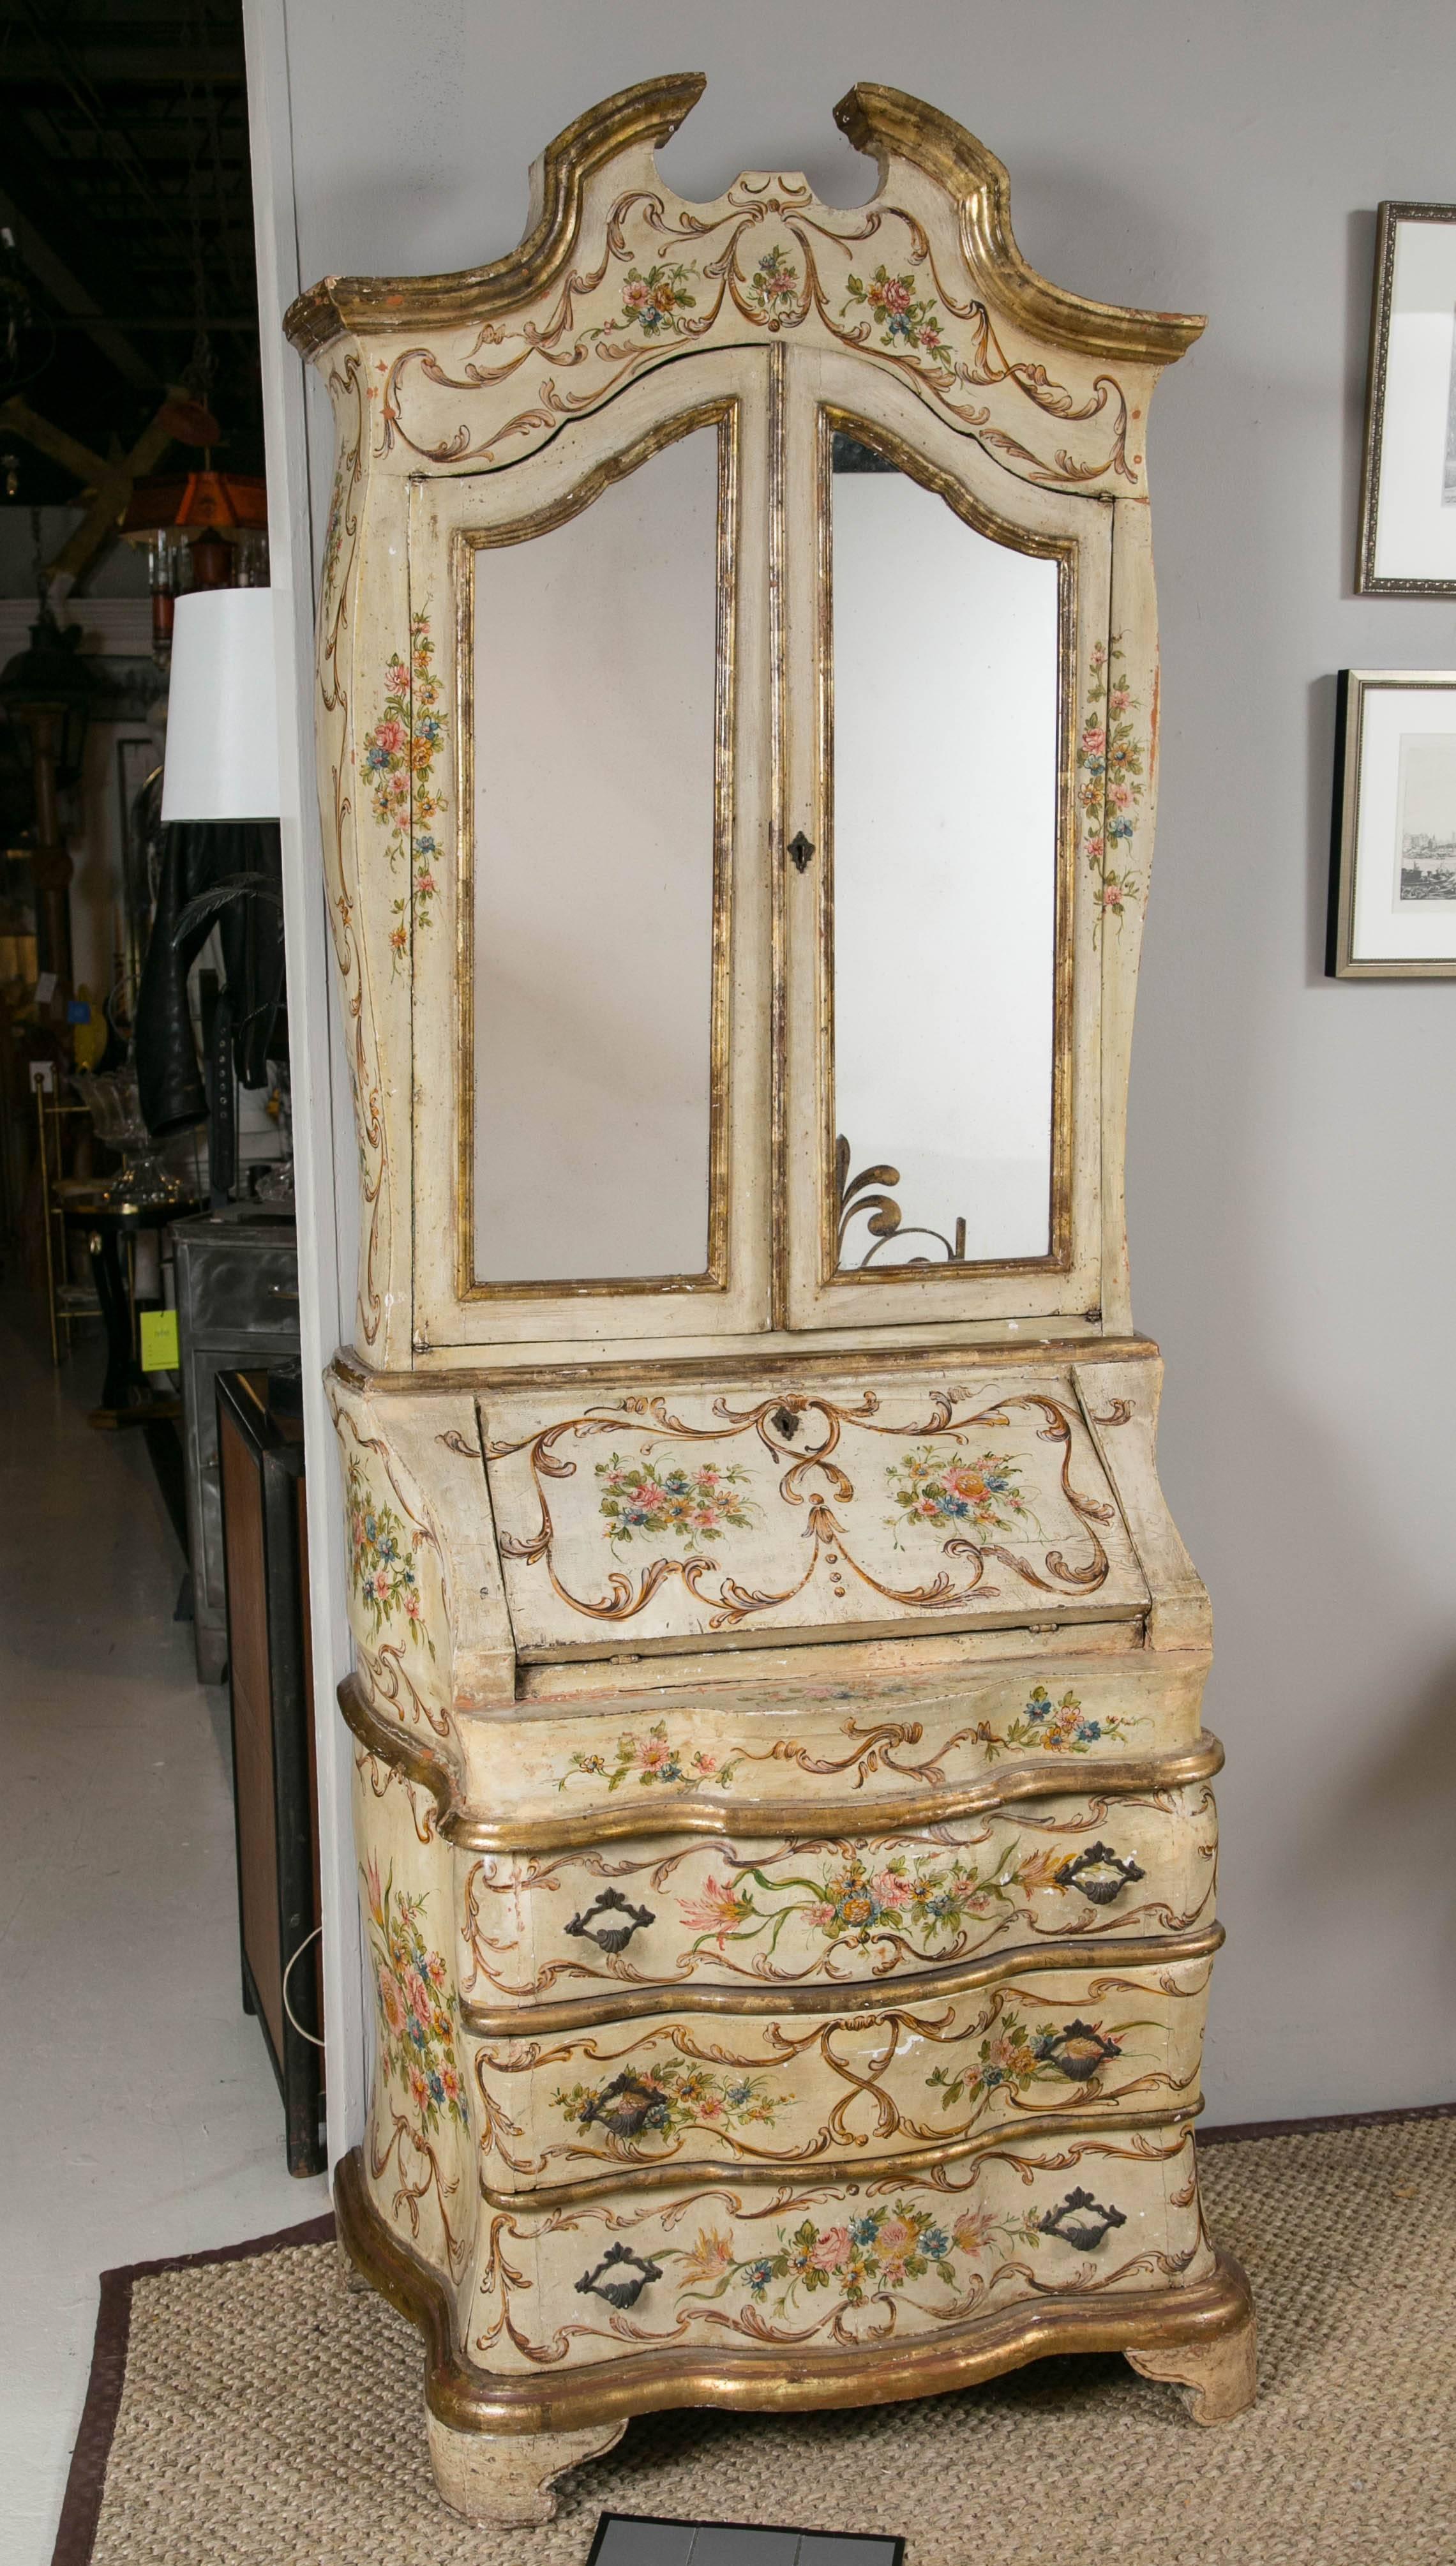 Antique hand-painted Venetian secretary. Two pieces. Original hand-painted condition with gold gilt details. Original mirrored doors on the upper cabinet. Interior cabinet lined in red damask with two removable shelves. Original key to desk,